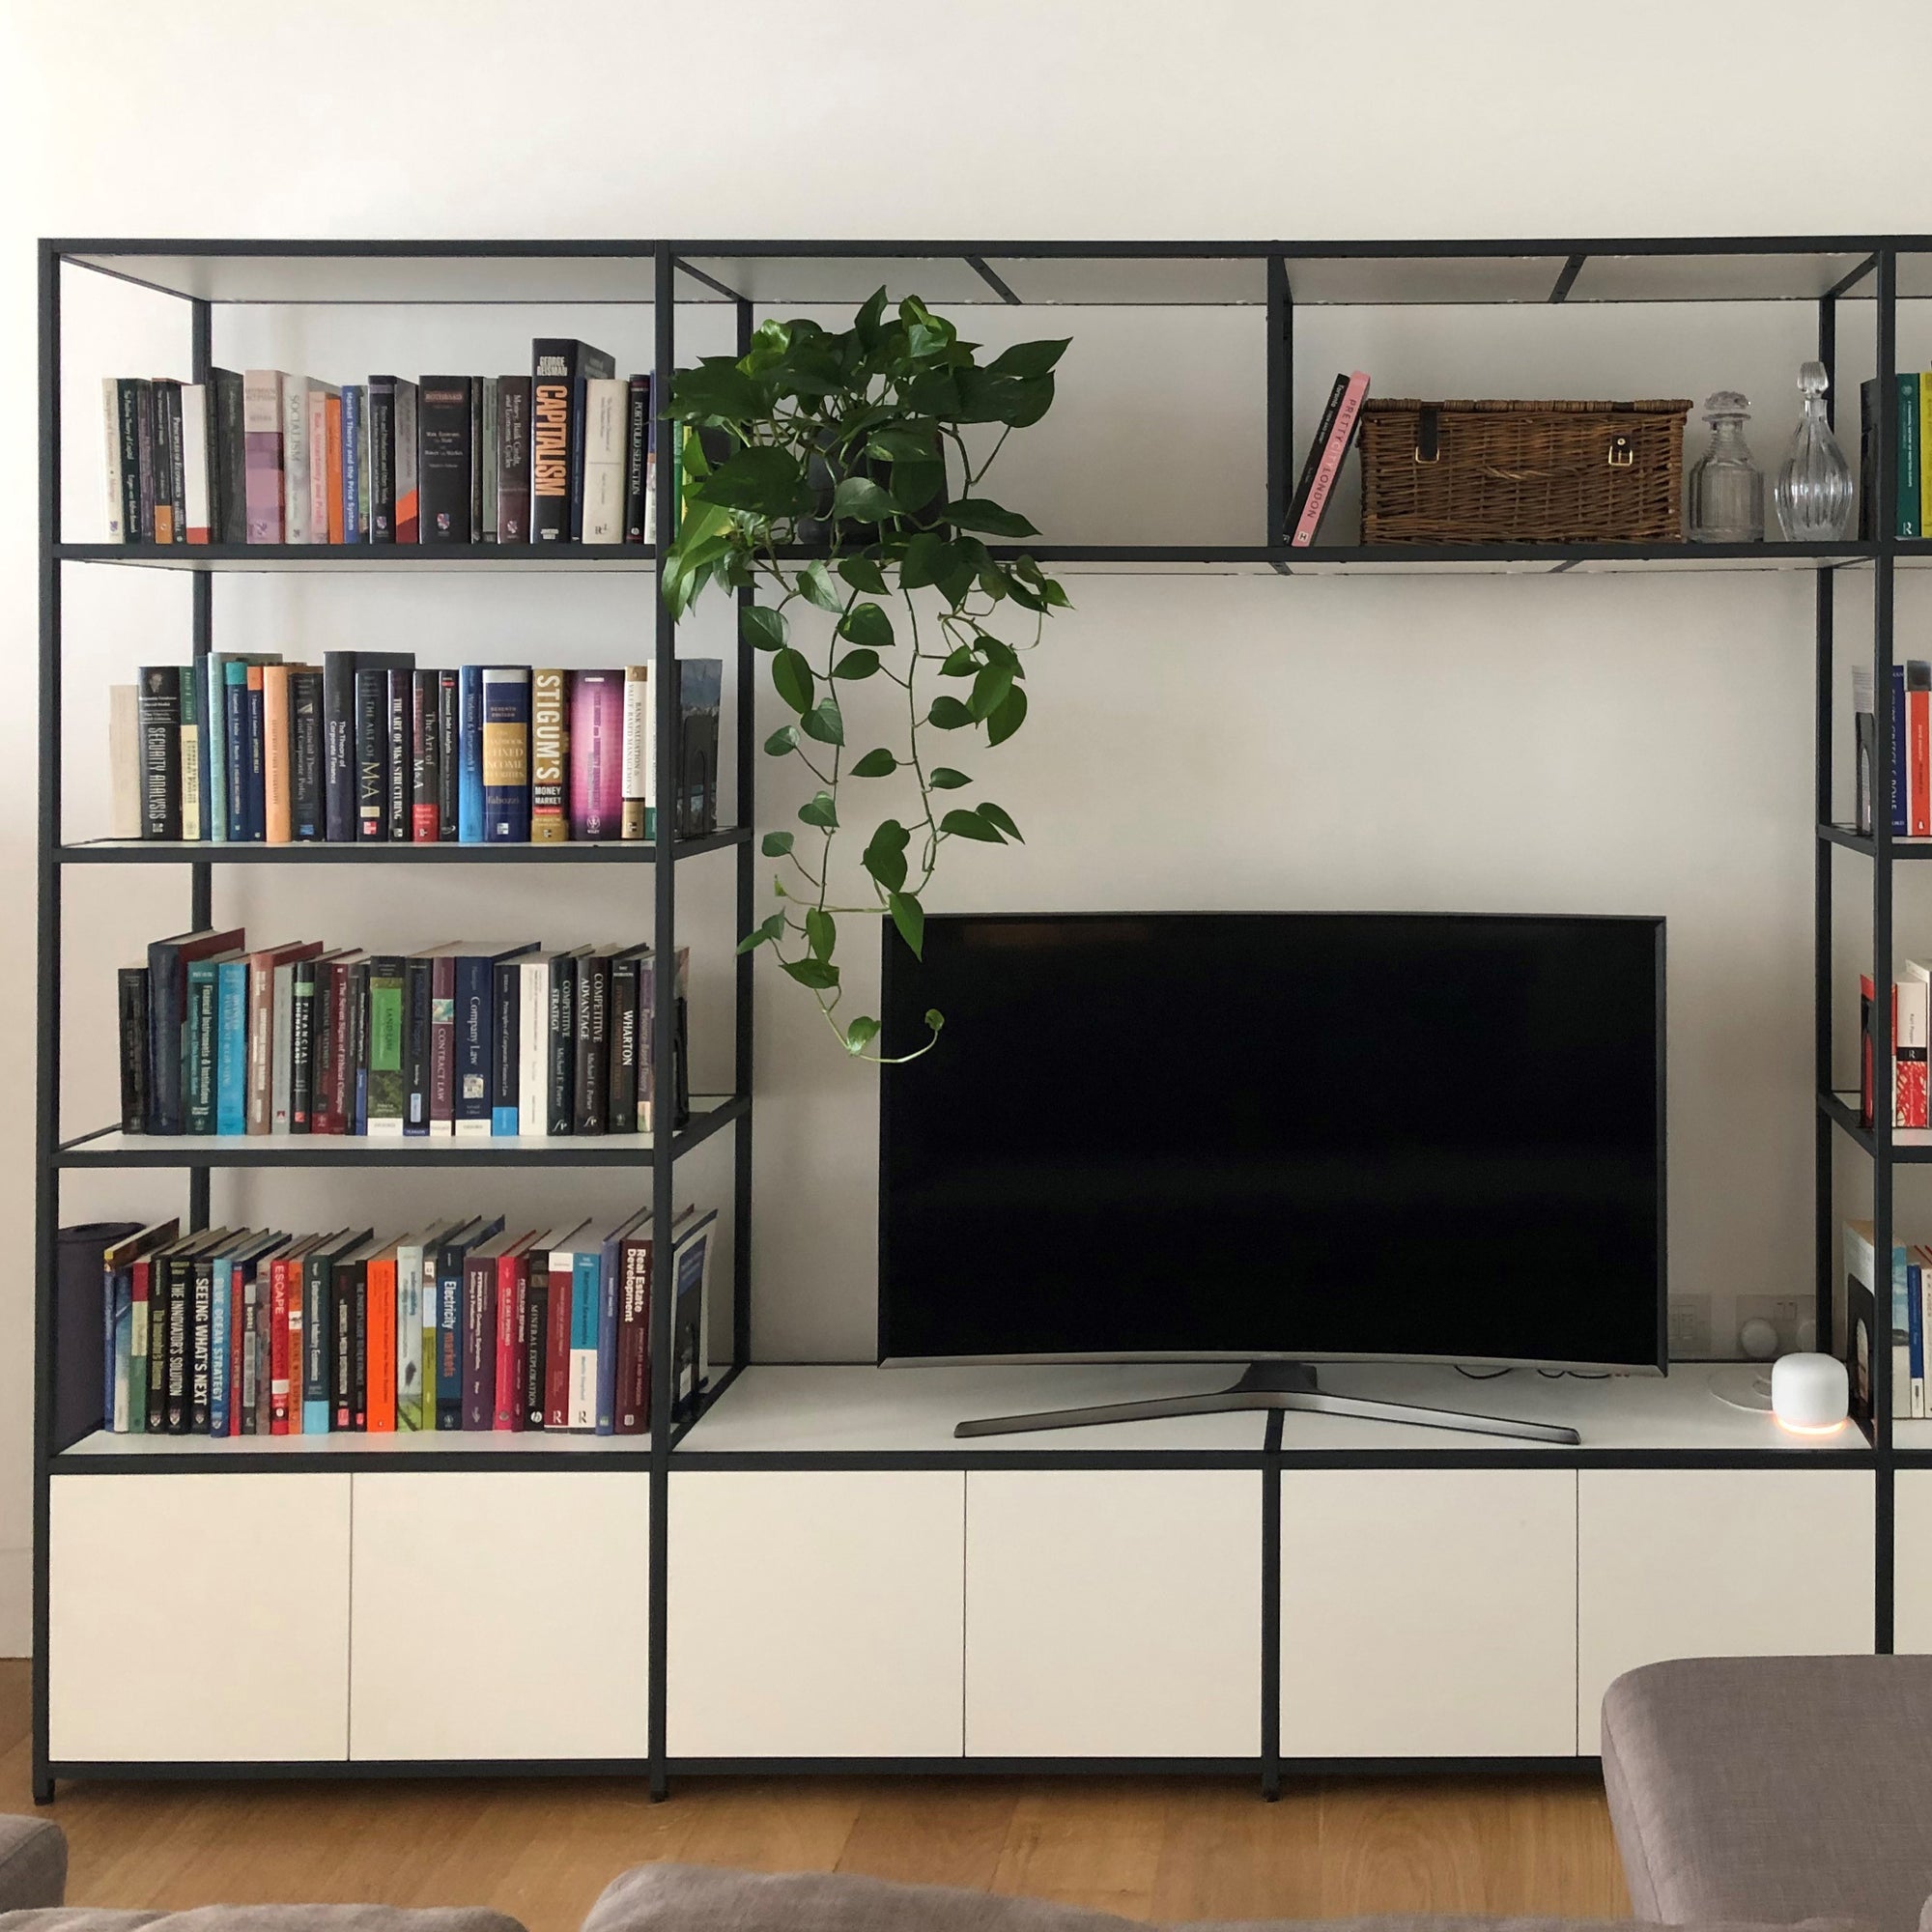 How to Create a Home Library with Modular Shelves